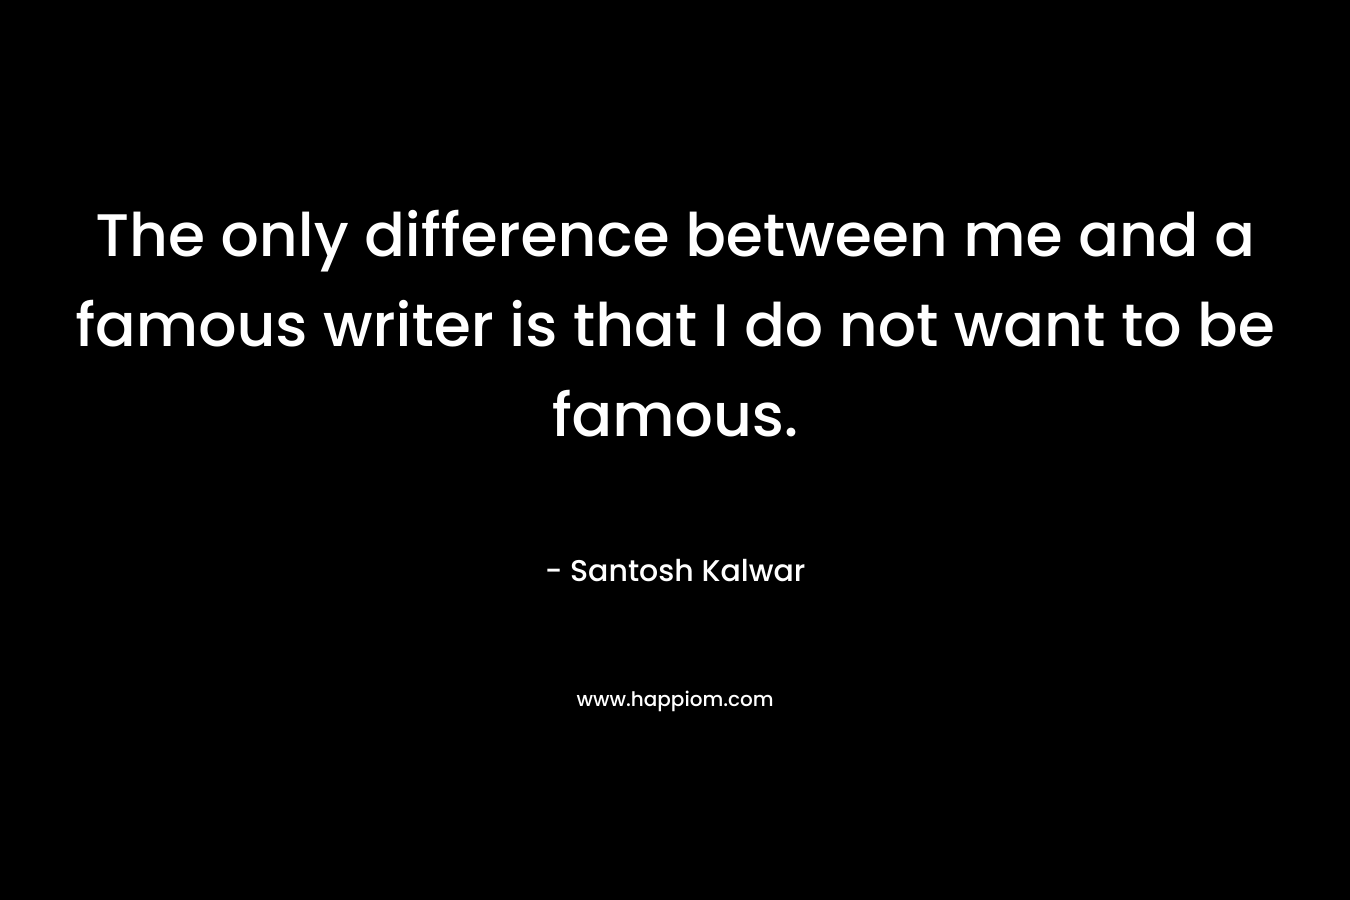 The only difference between me and a famous writer is that I do not want to be famous.